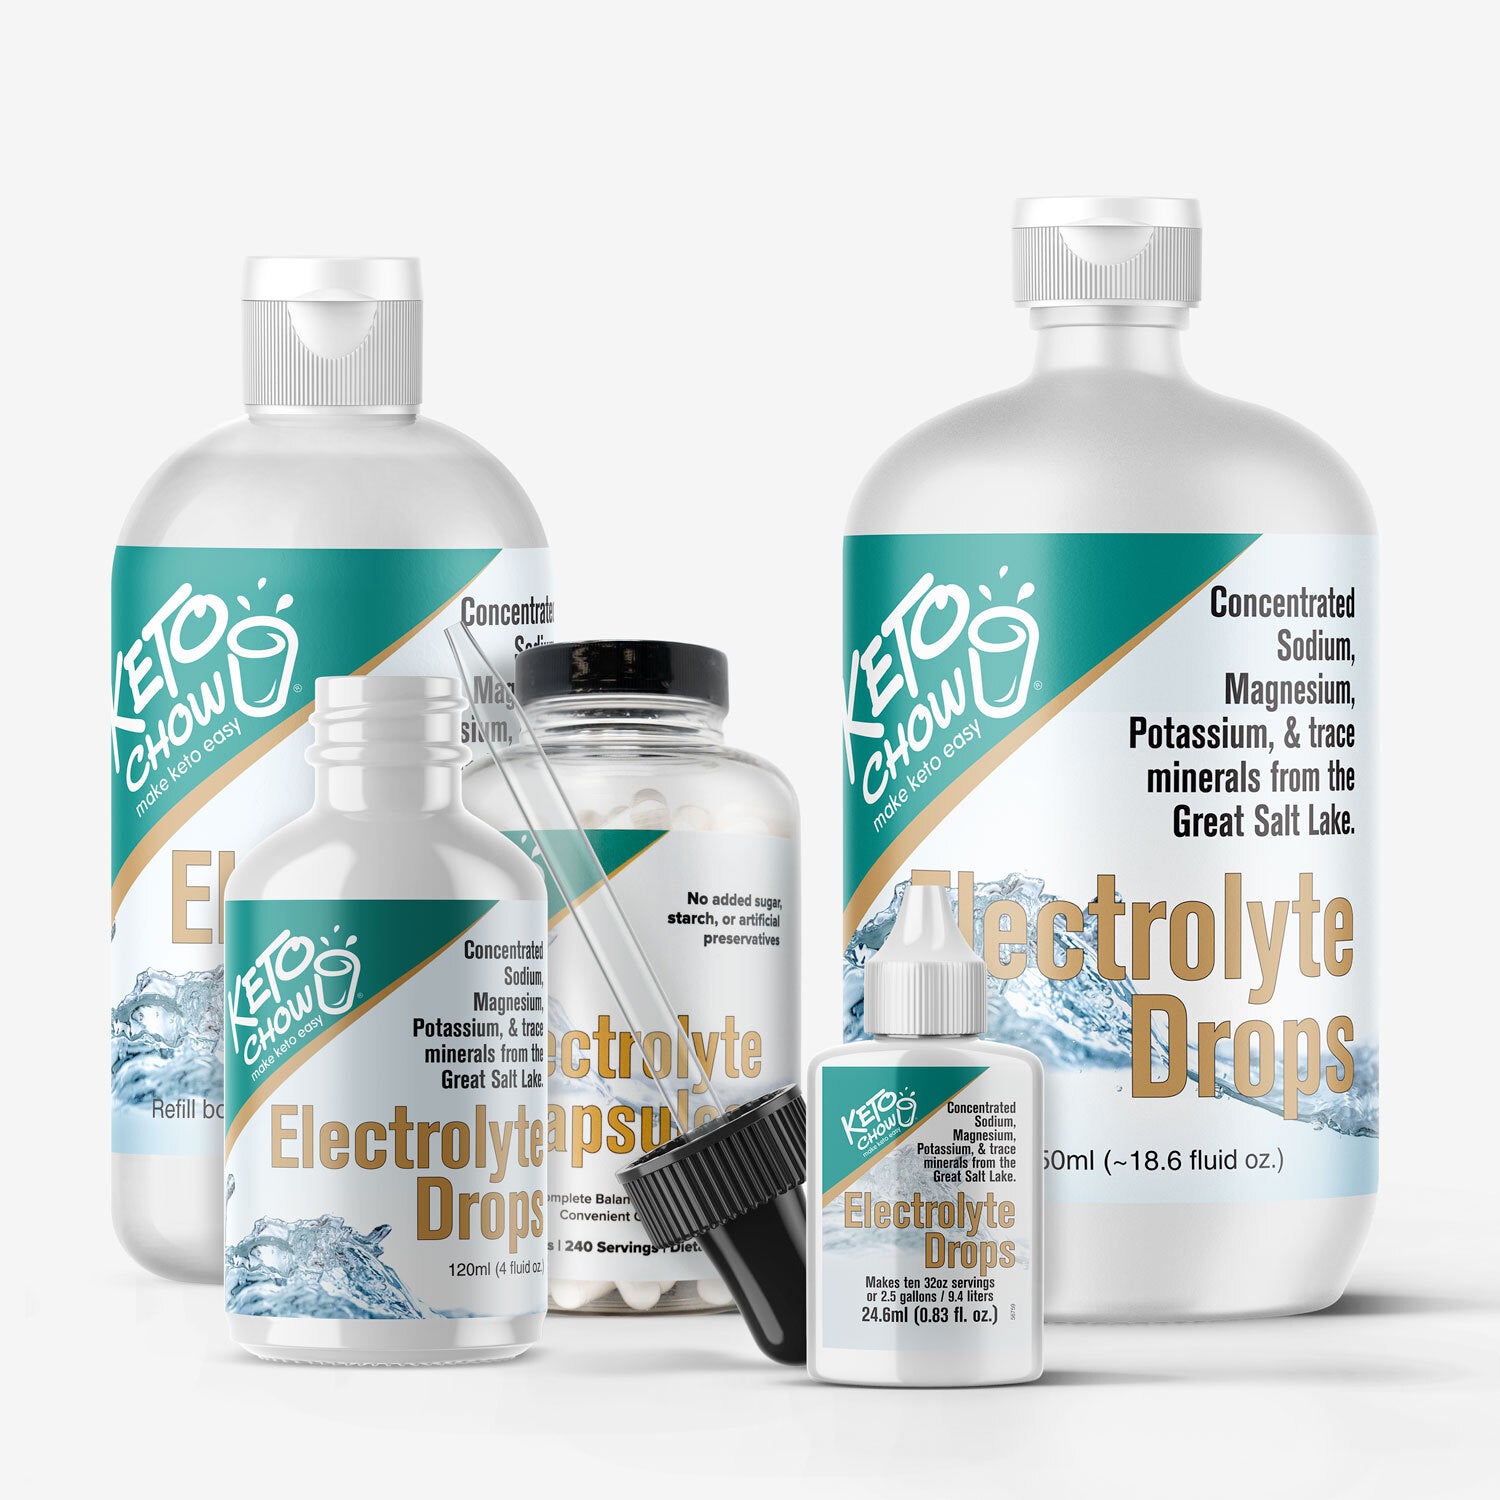 Family of Electrolyte Drops and Capsules products.